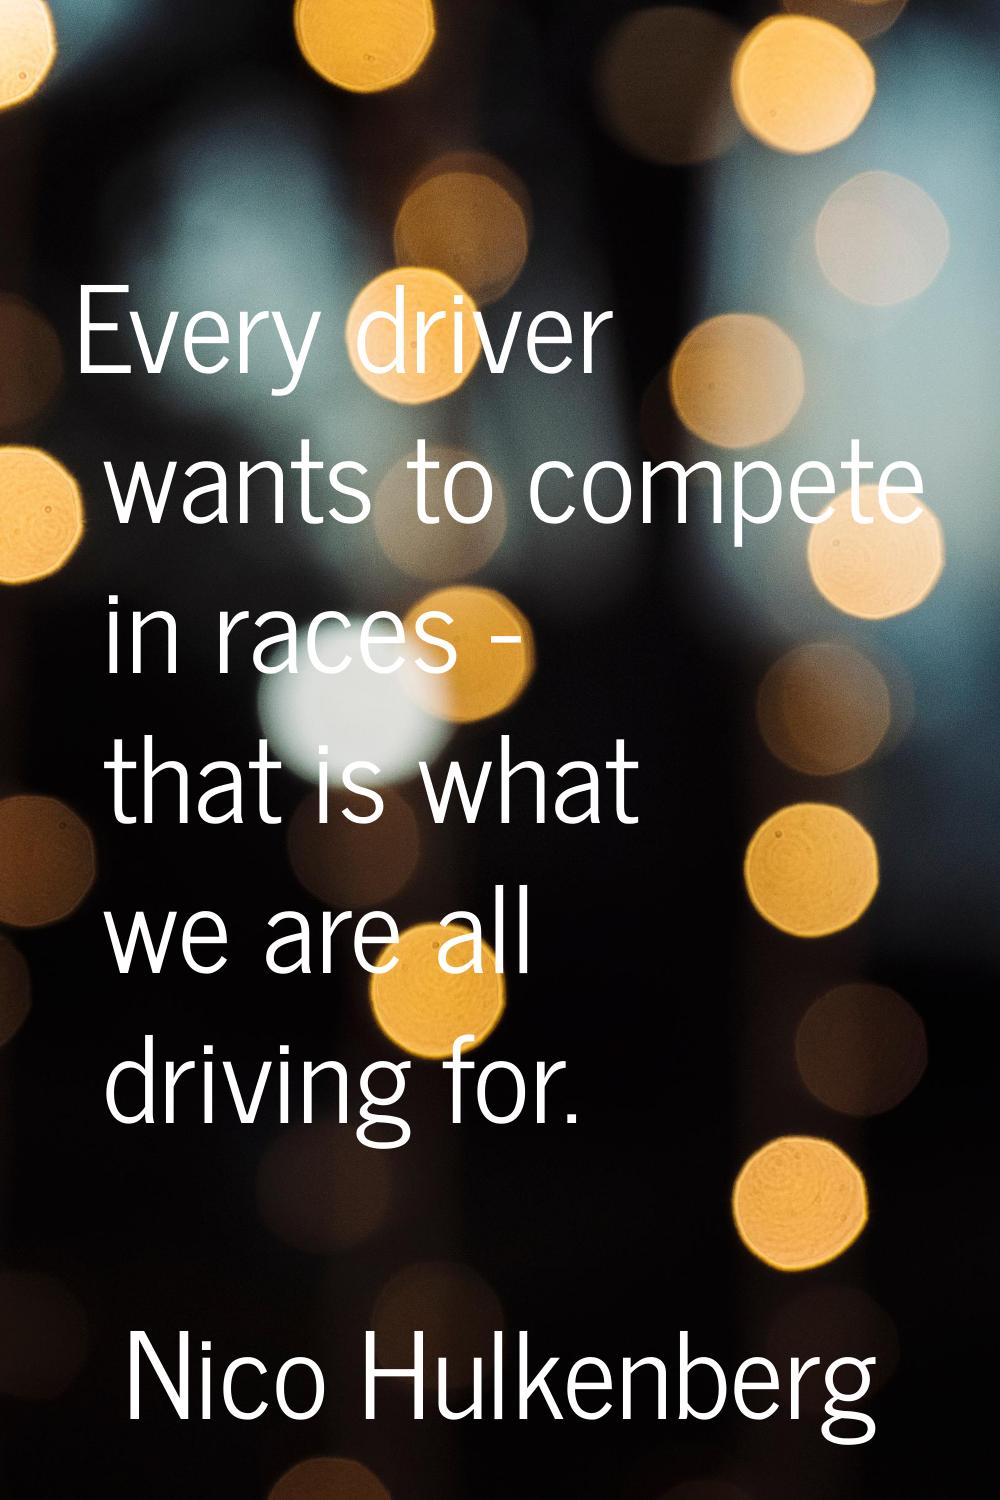 Every driver wants to compete in races - that is what we are all driving for.